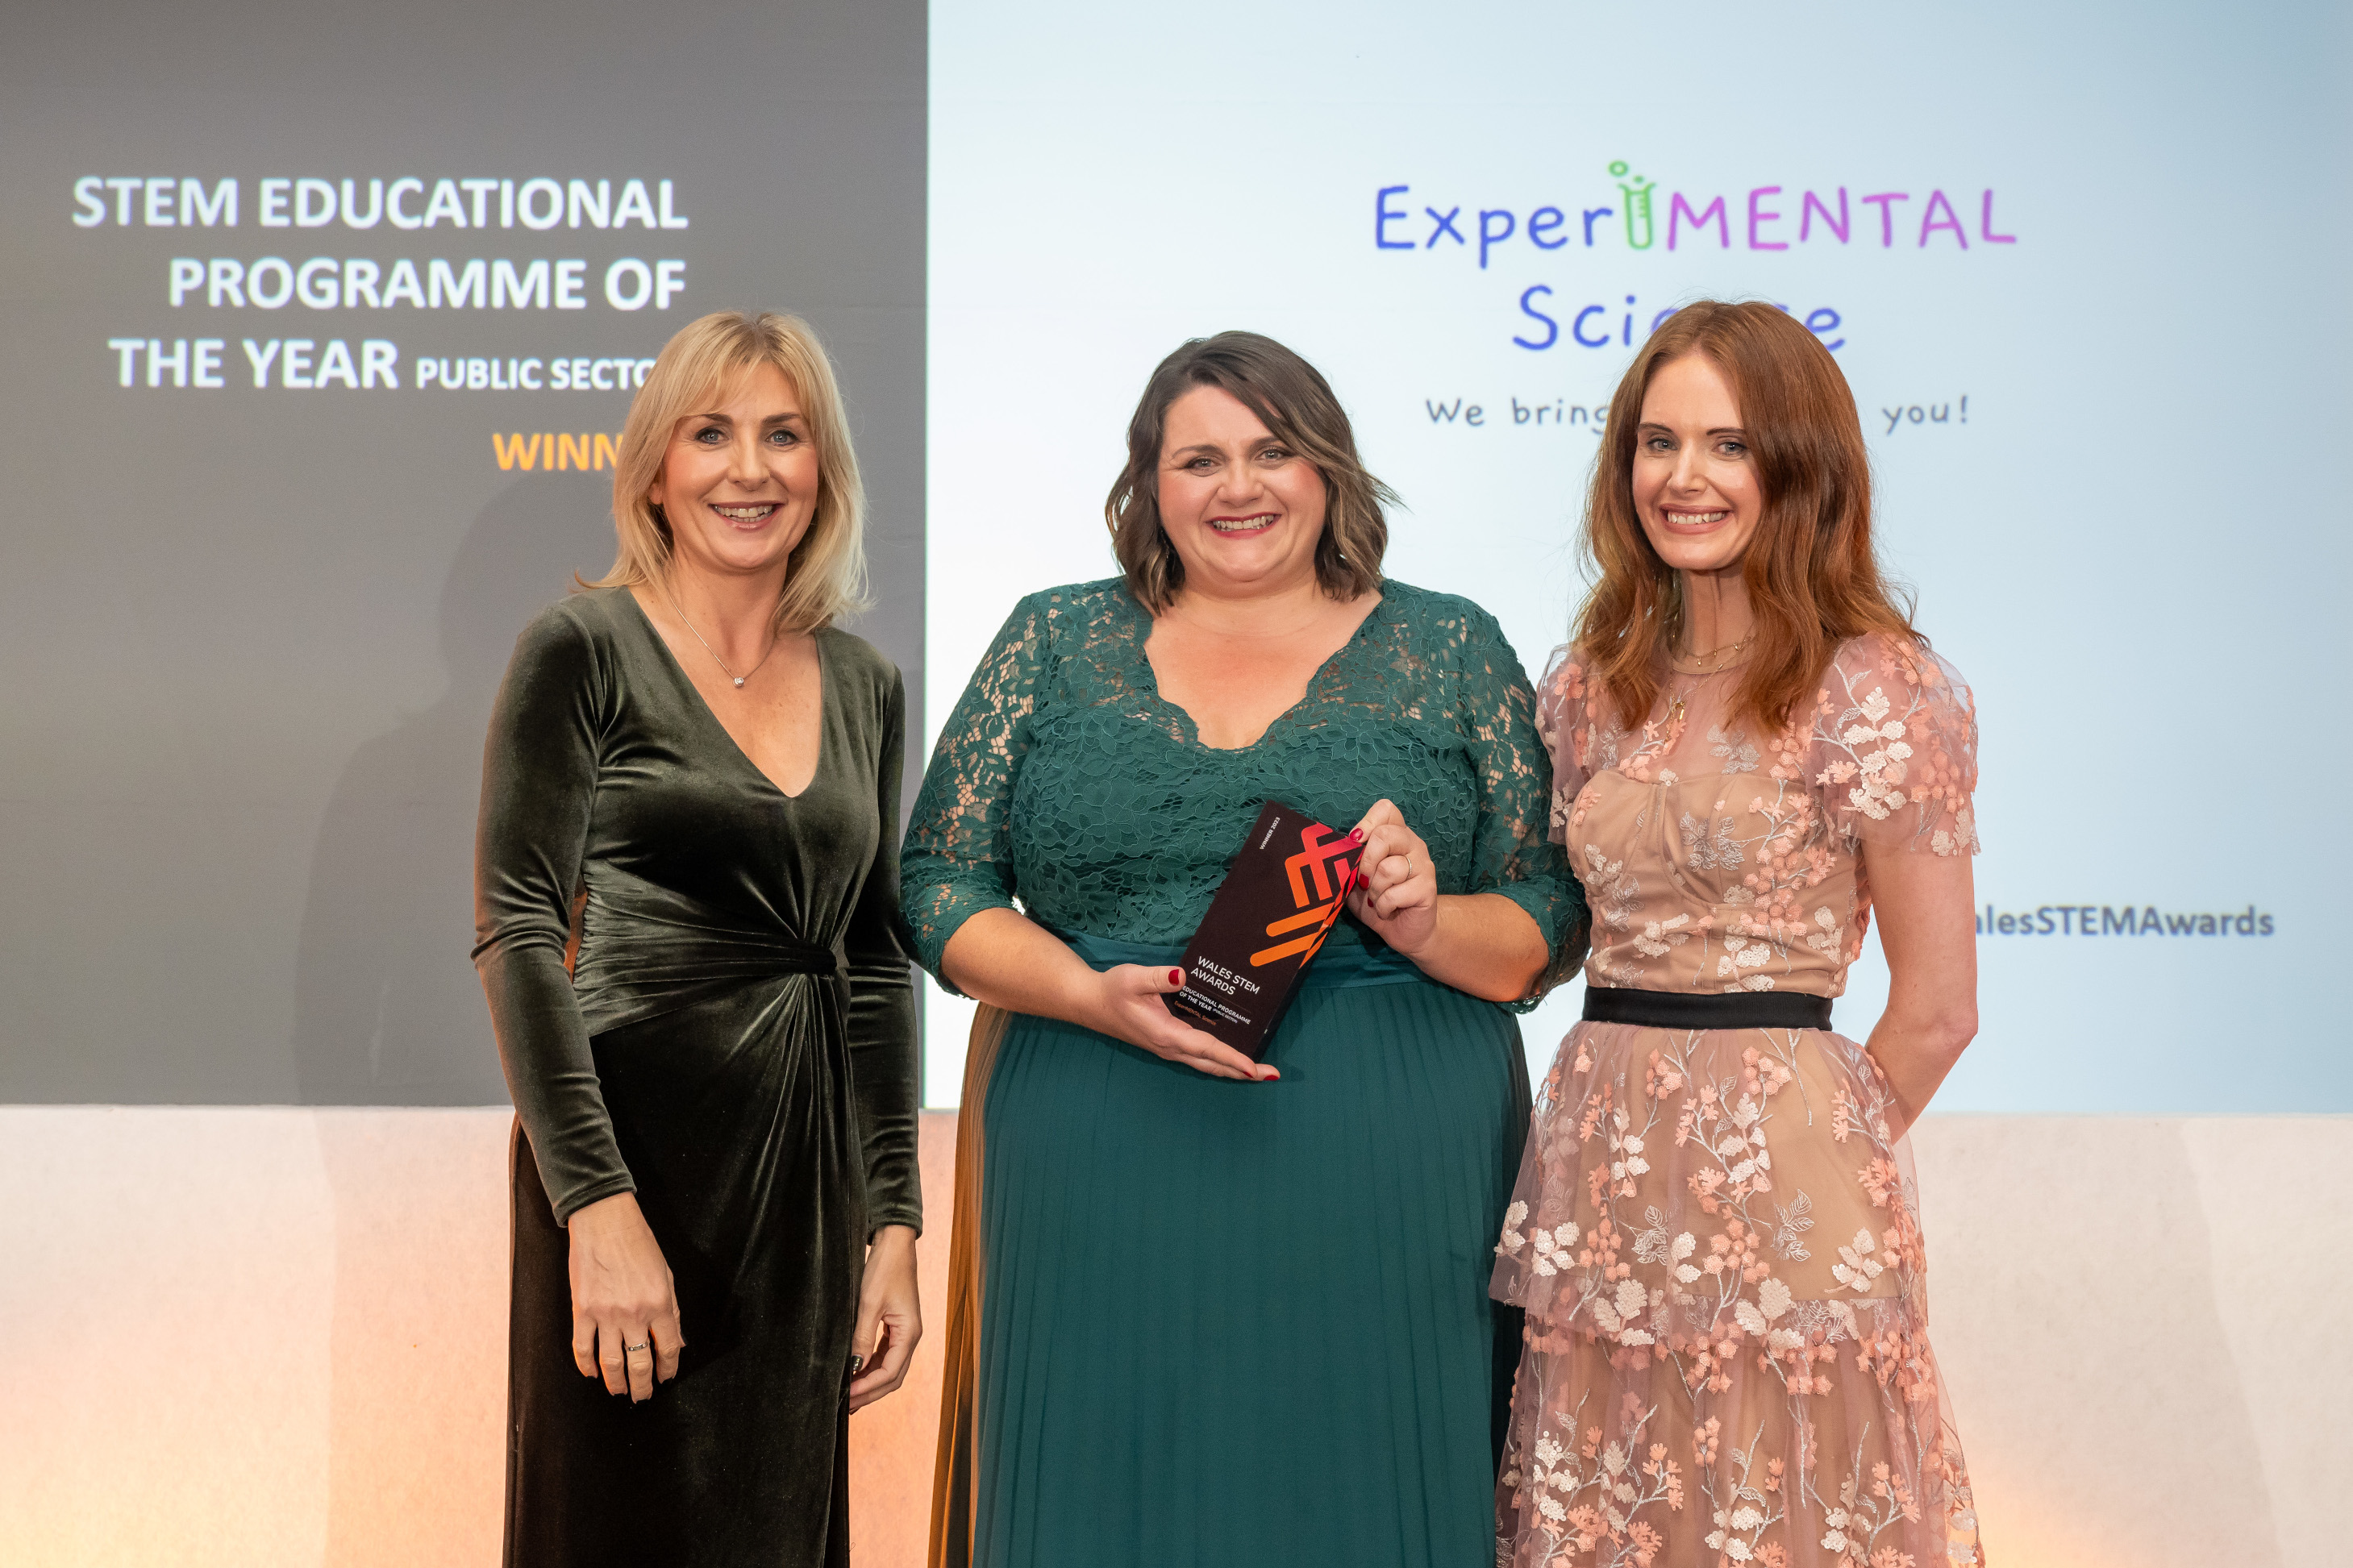 ExperiMENTAL Science wins STEM Educational Programme of the Year Award